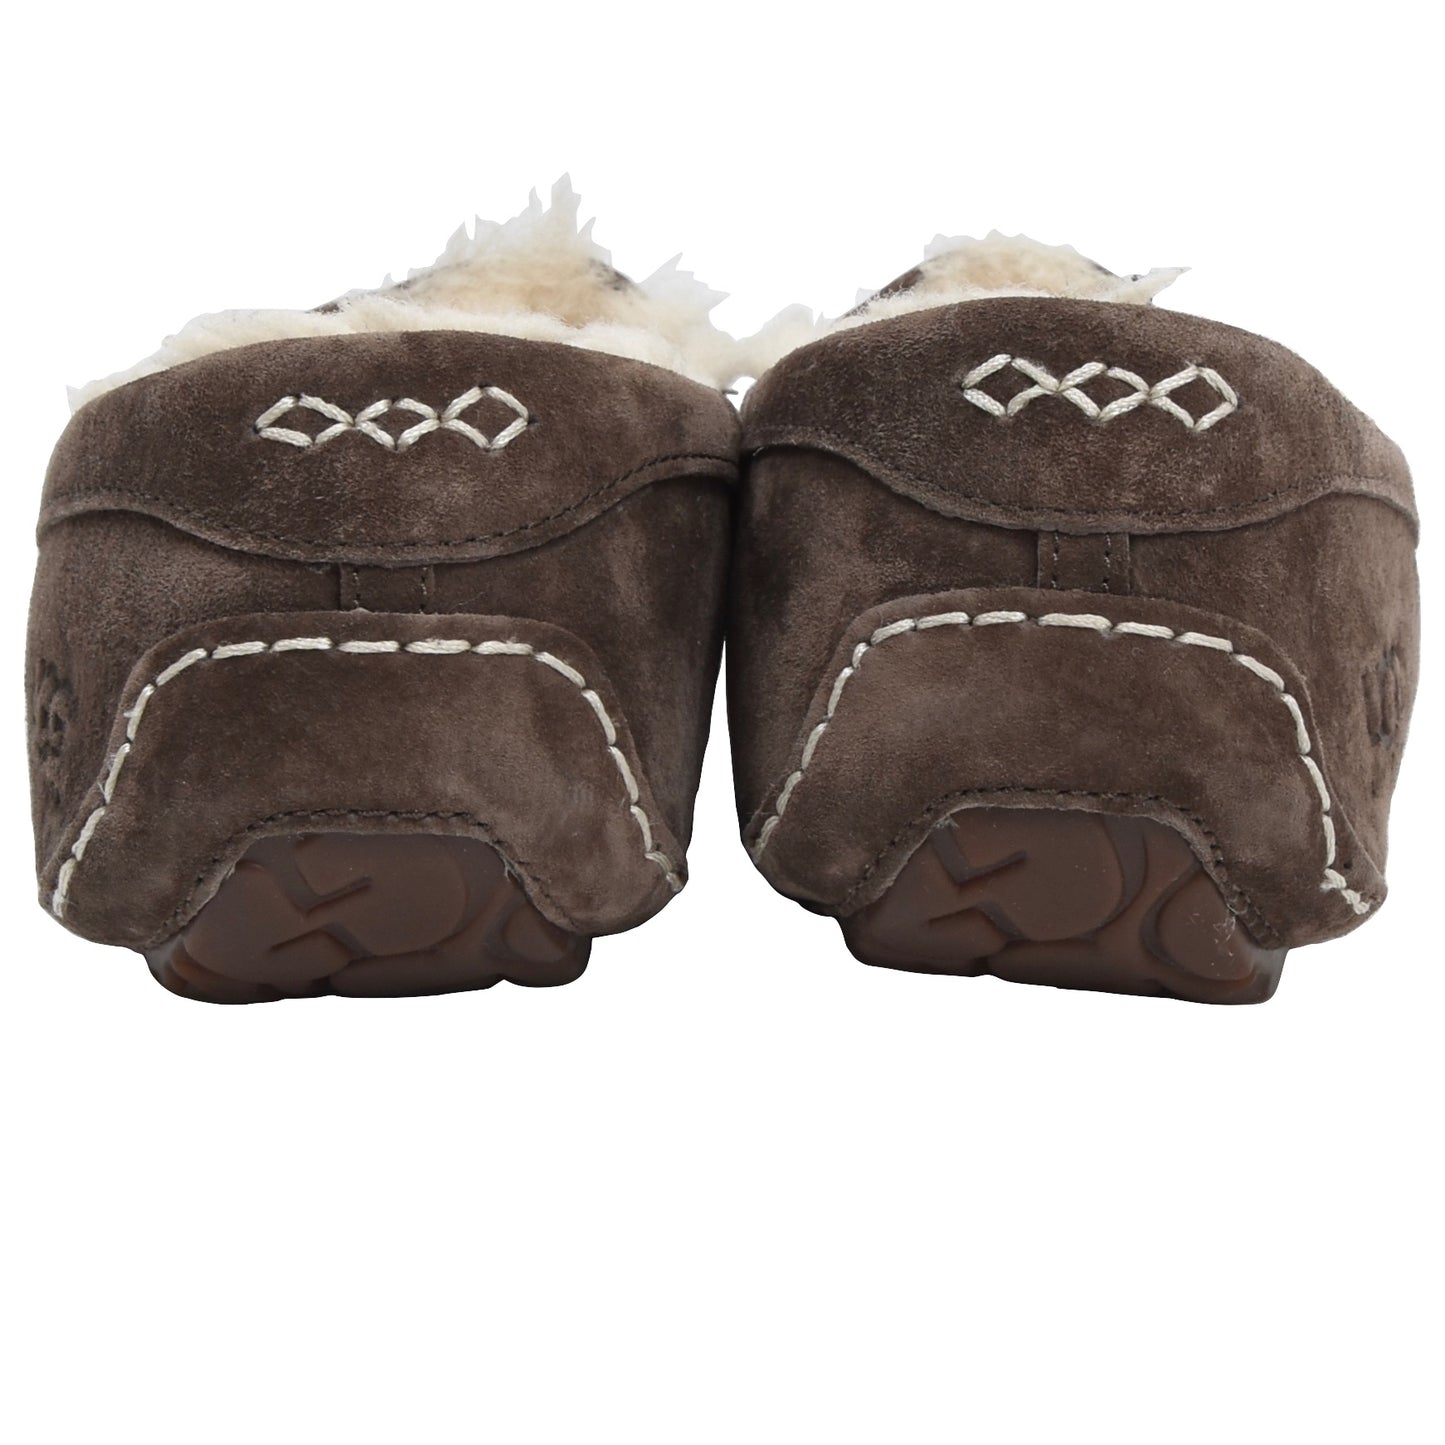 Ugg Australia Shearling Slippers Size 41 - Brown